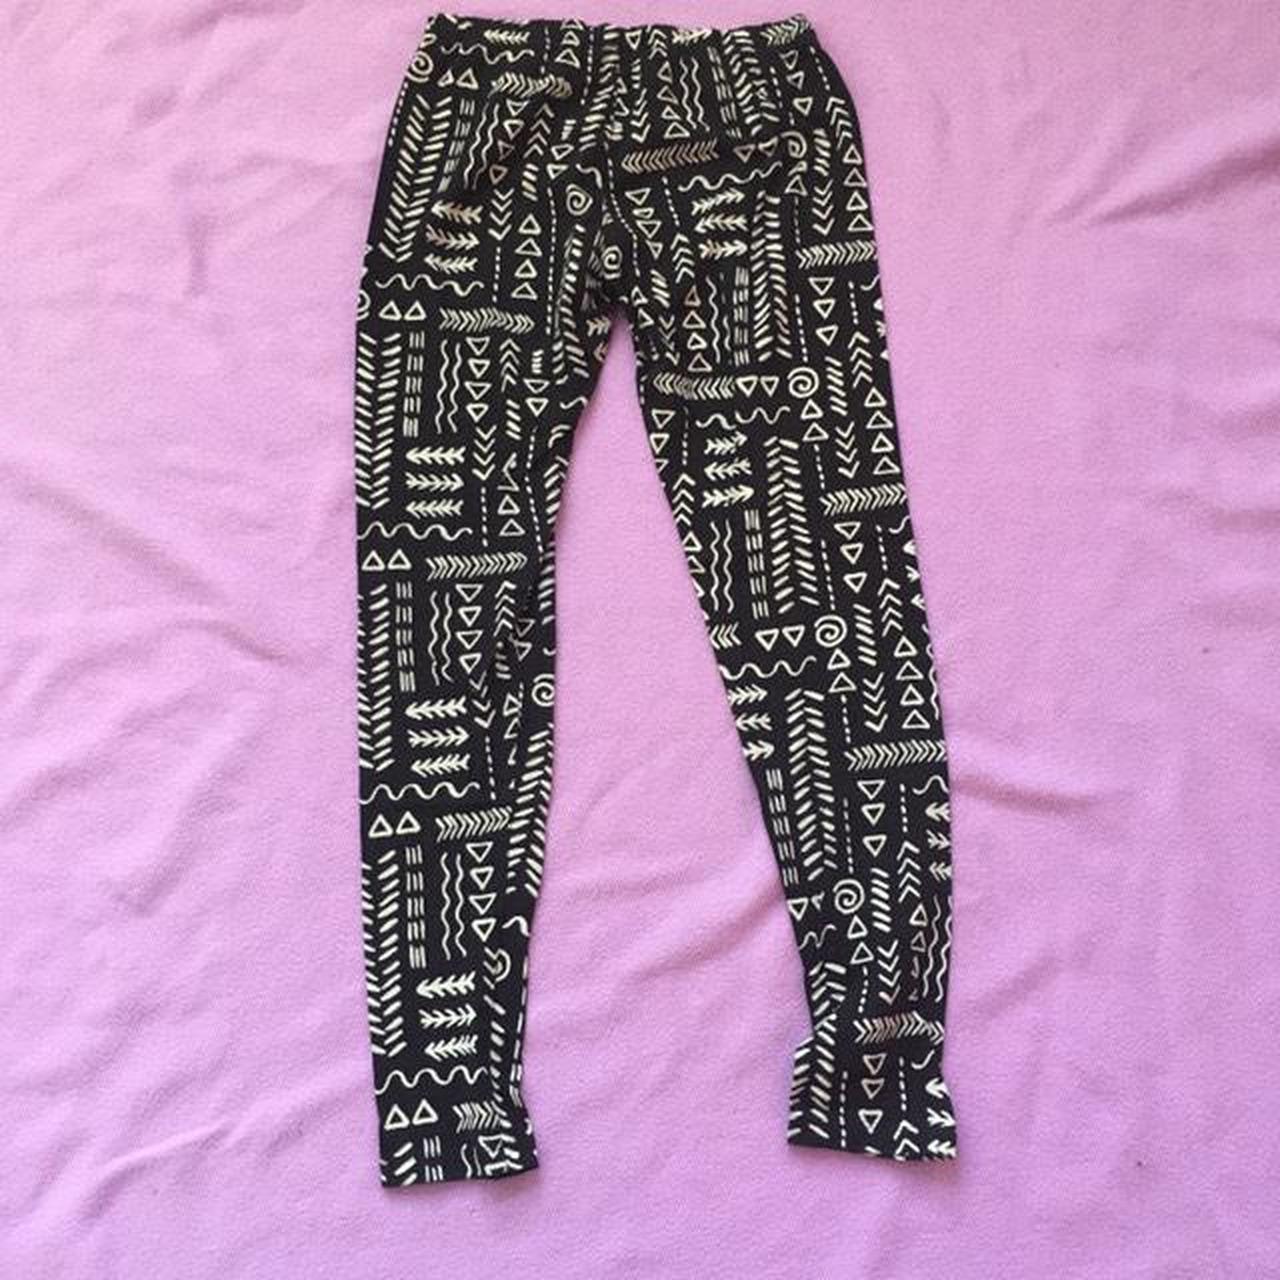 Mossimo patterned leggings. The label says large but